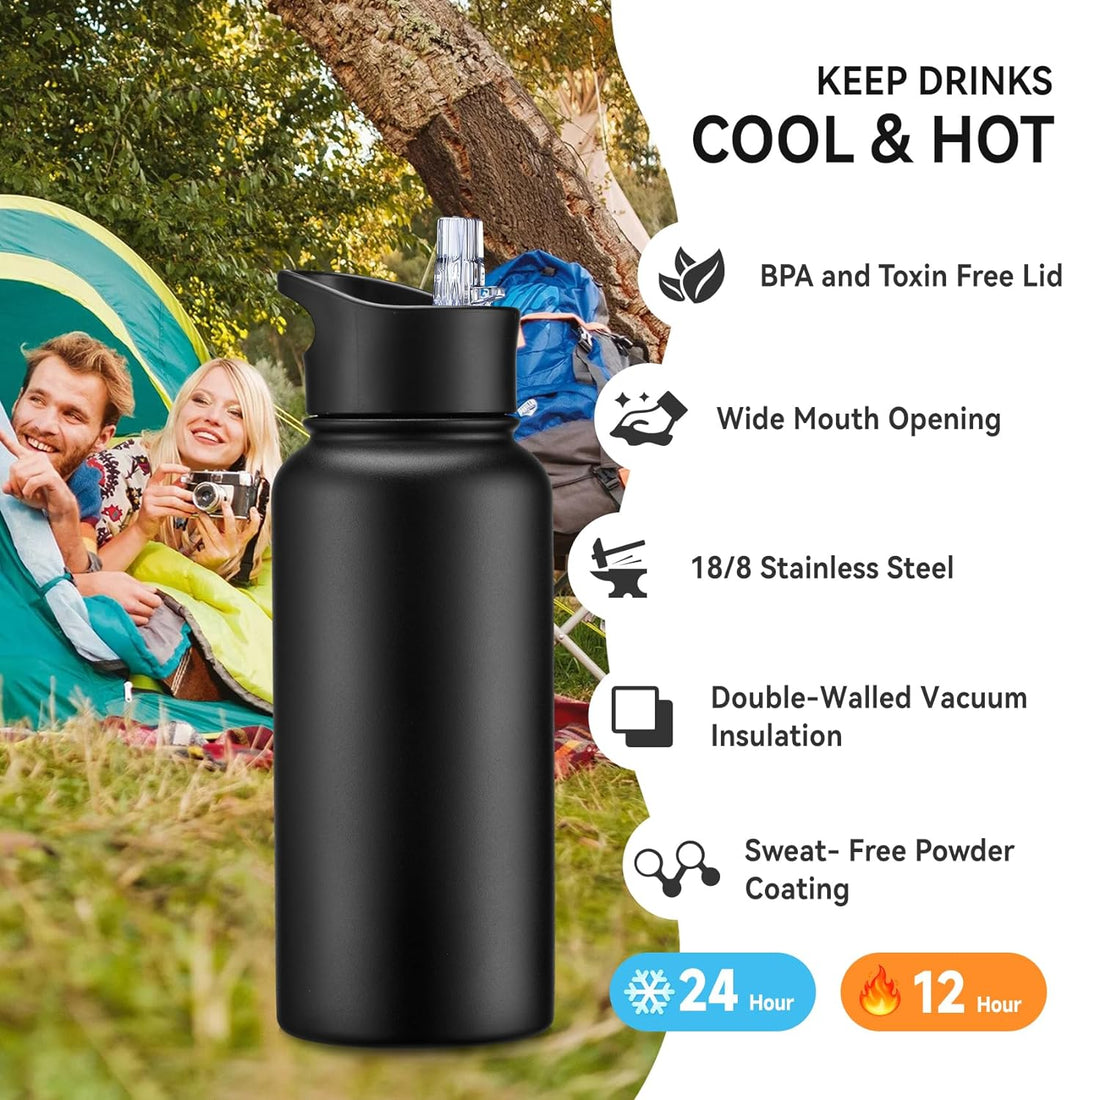 Cool Yoleb 32 oz Insulated Water Bottle with Straw & Spout Lid, Leak Proof Metal Water Bottles, Stainless Steel Double Wall Vacuum, Wide Mouth Thermal Water Bottle for Travel Sports (Black, 1)